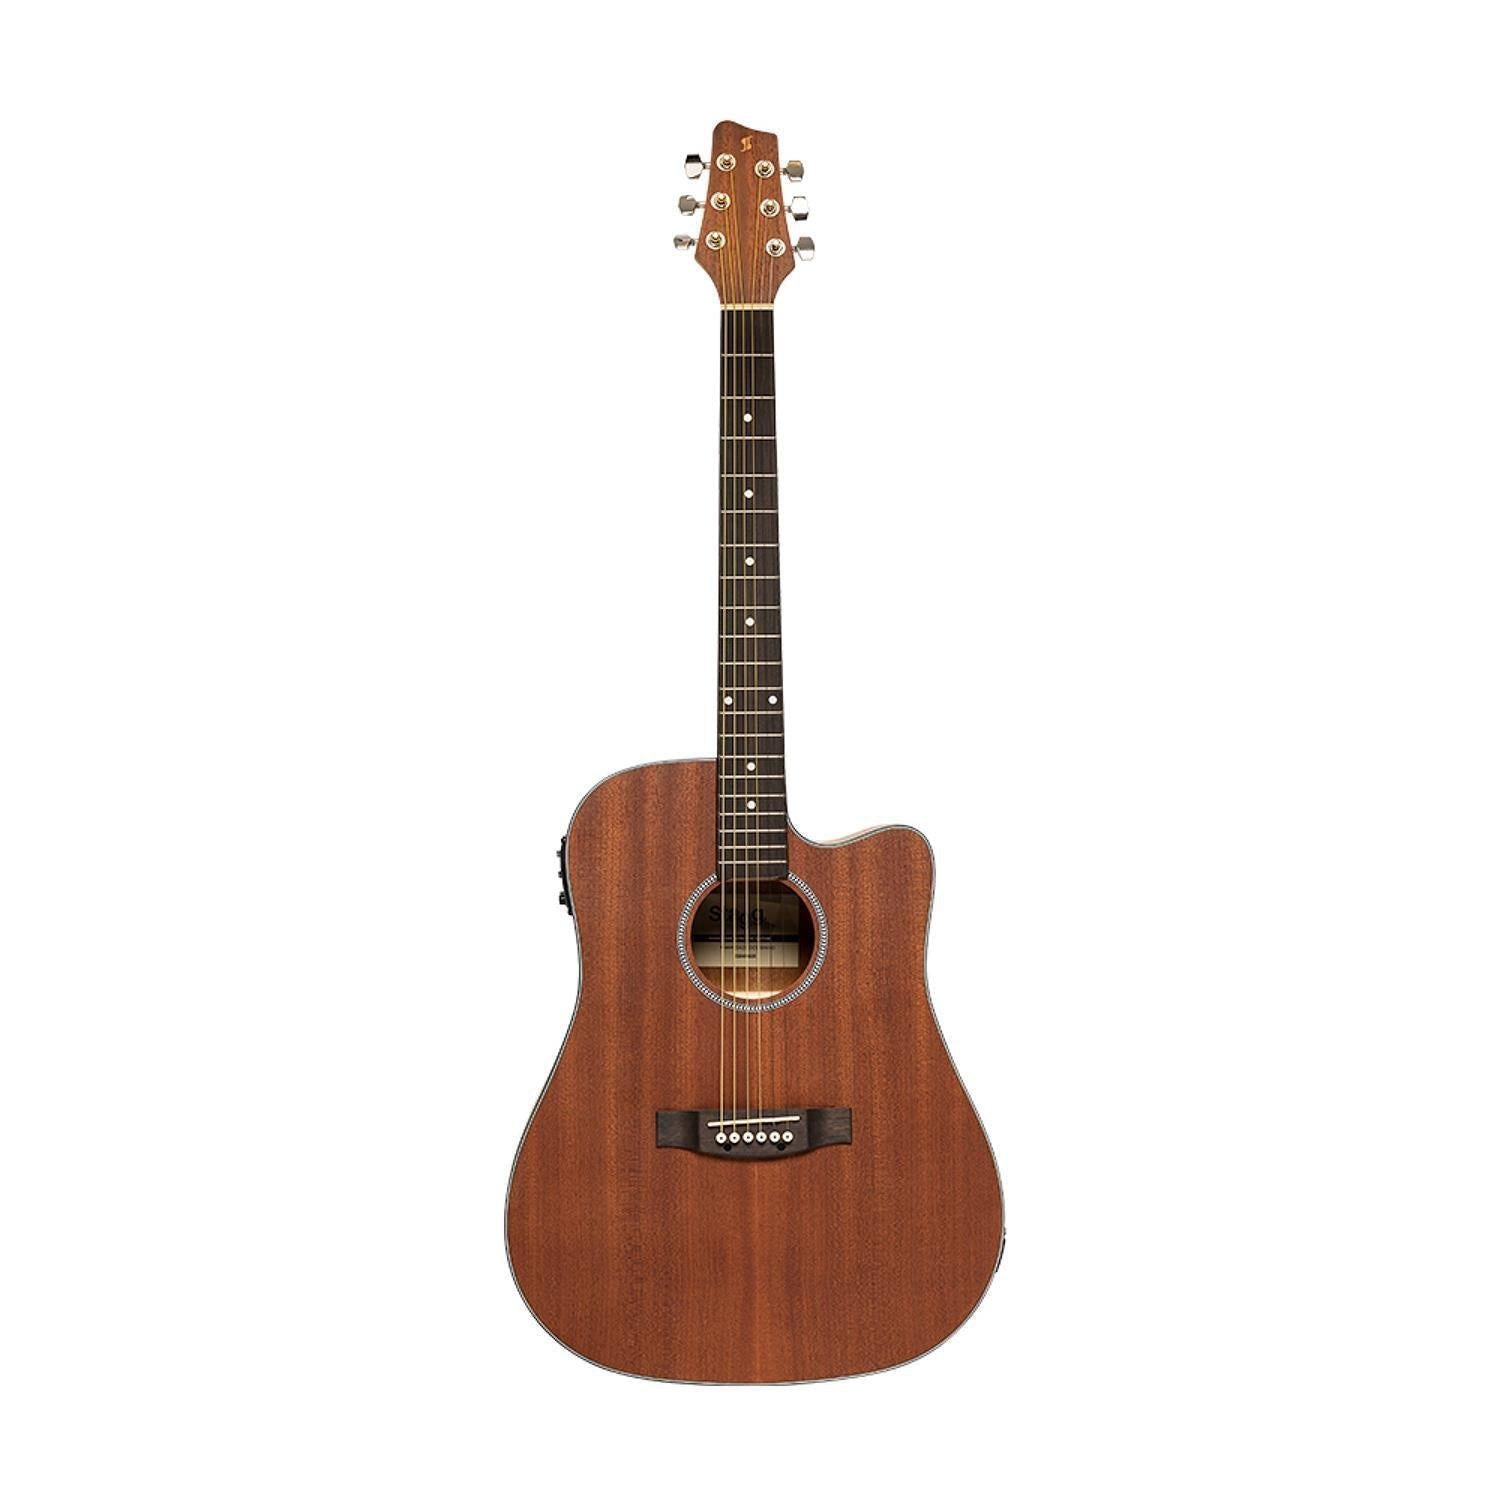 Stagg SA25 DCE MAHO Electro-Acoustic Dreadnought Guitar with Cutaway - DY Pro Audio